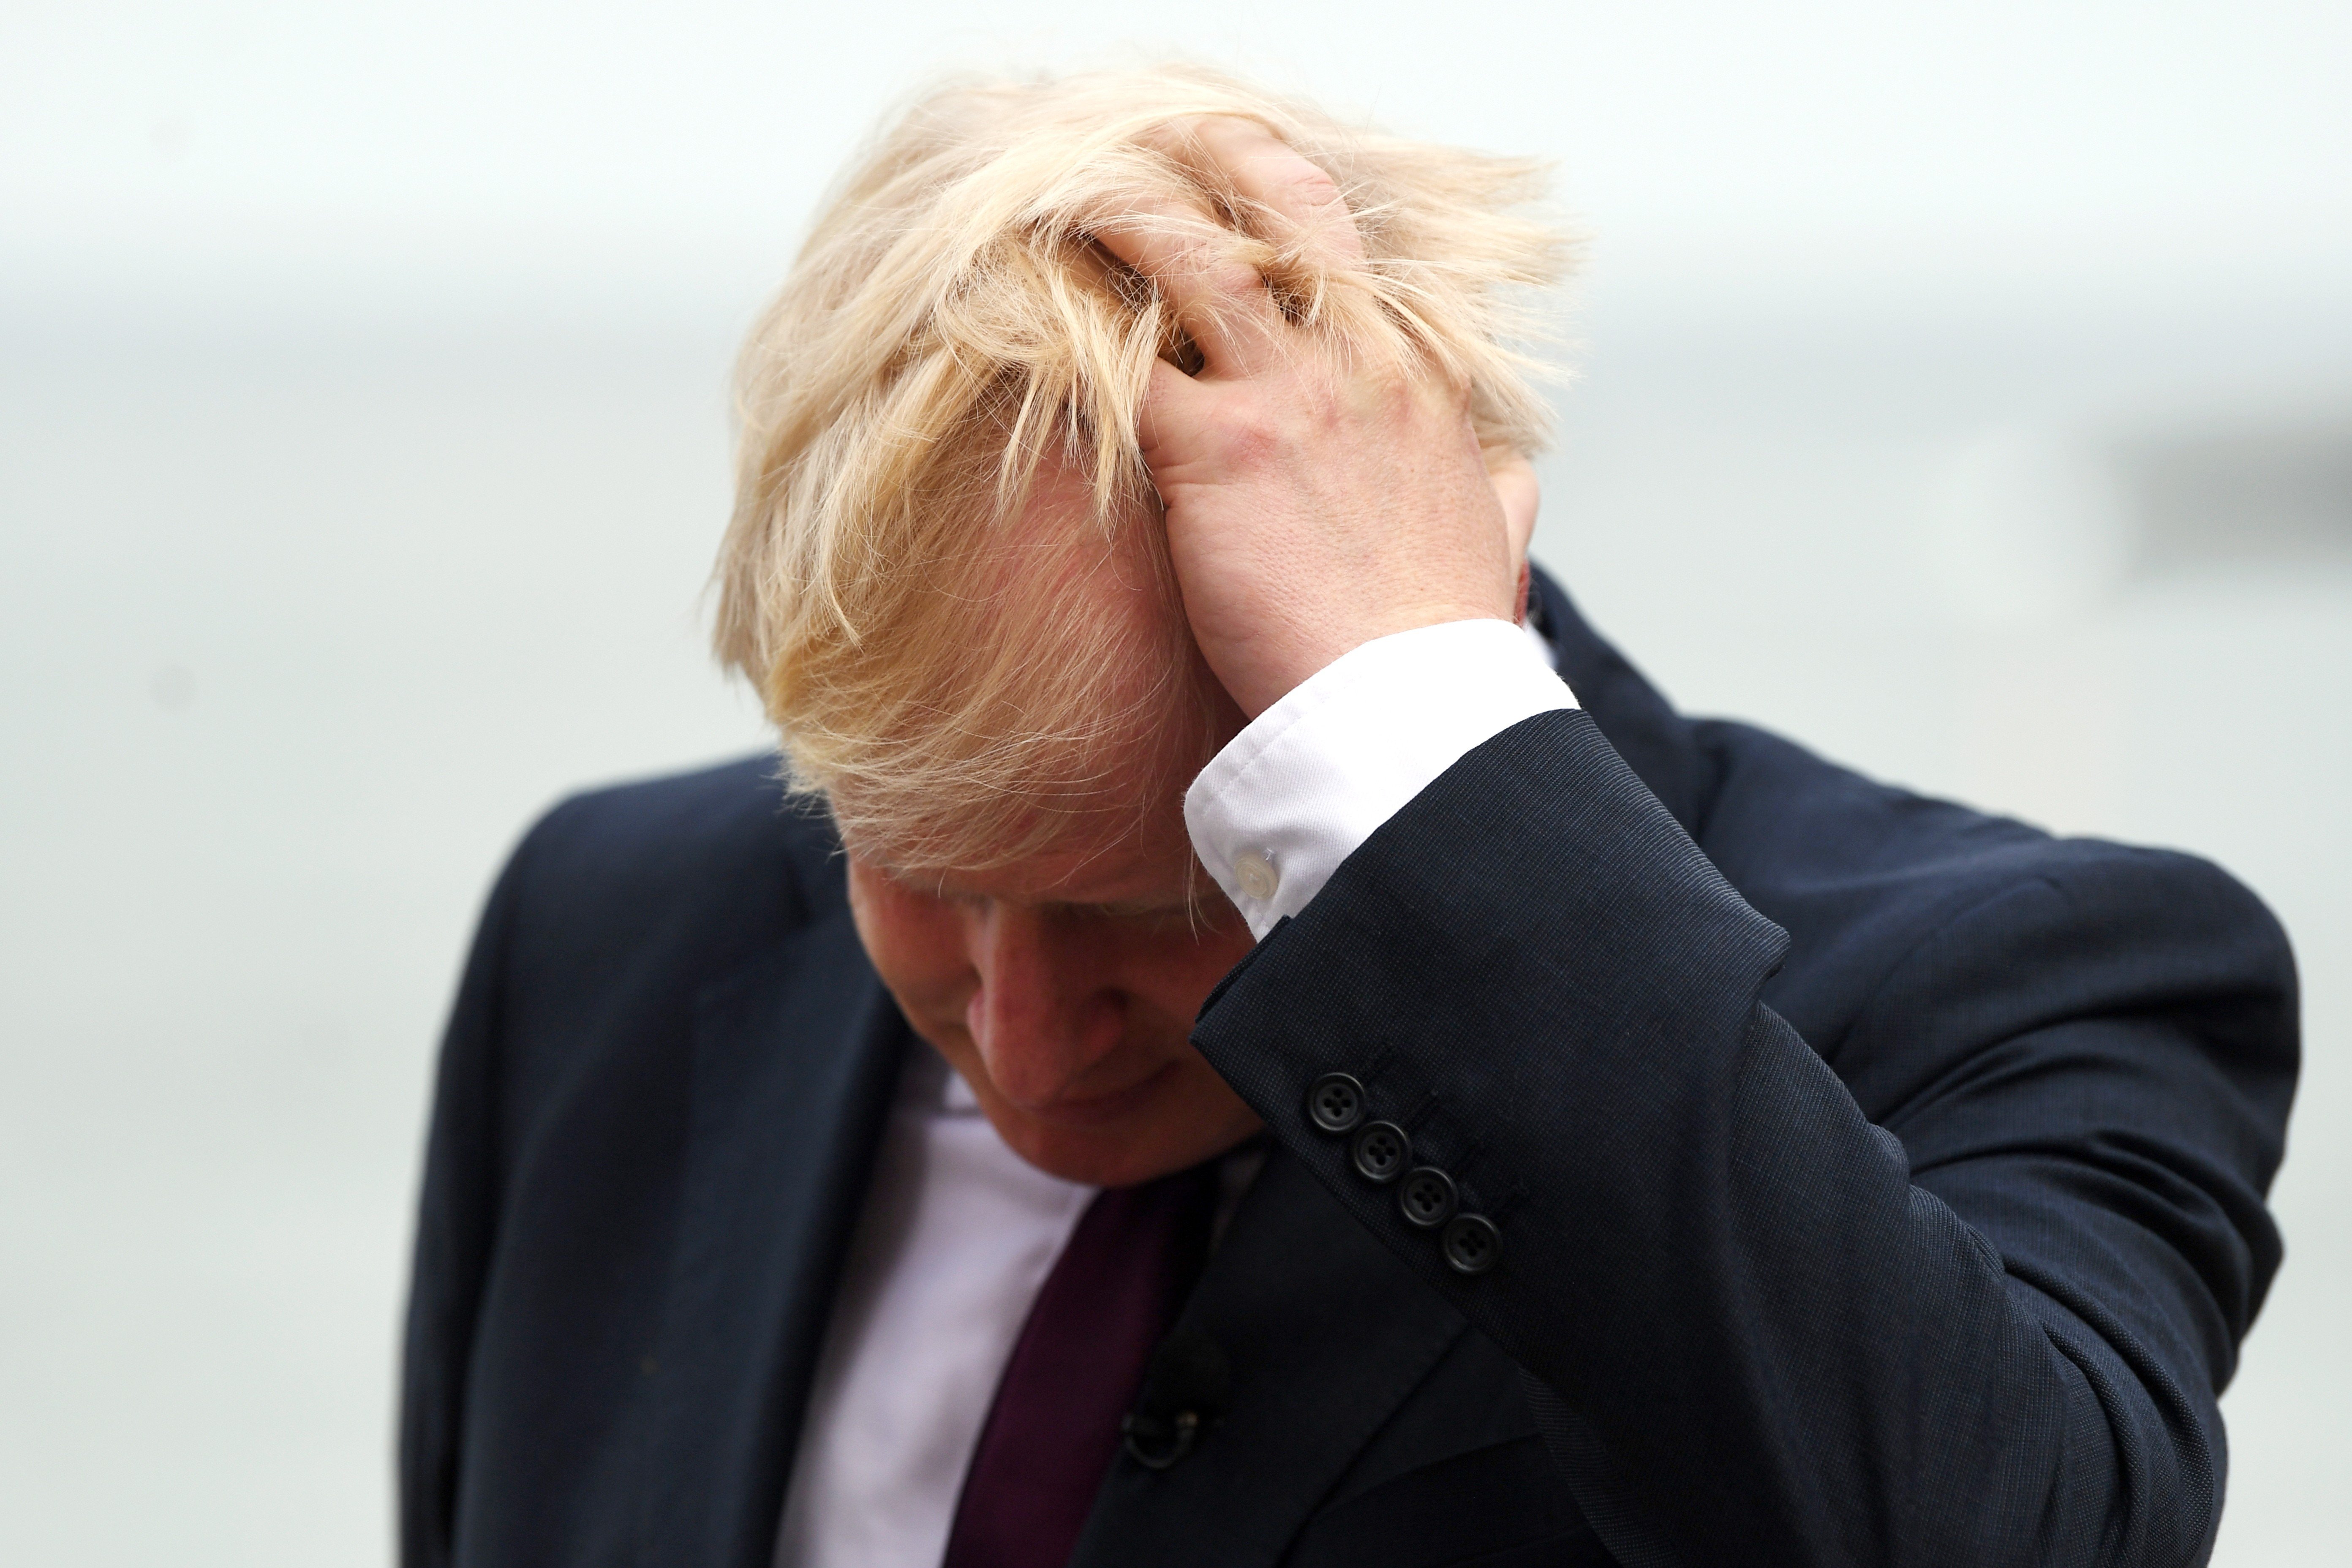 Britain’s Prime Minister Boris Johnson recently stated that he would “rather be dead in a ditch” than ask the EU to delay Brexit beyond October 31. Photo: EPA-EFE